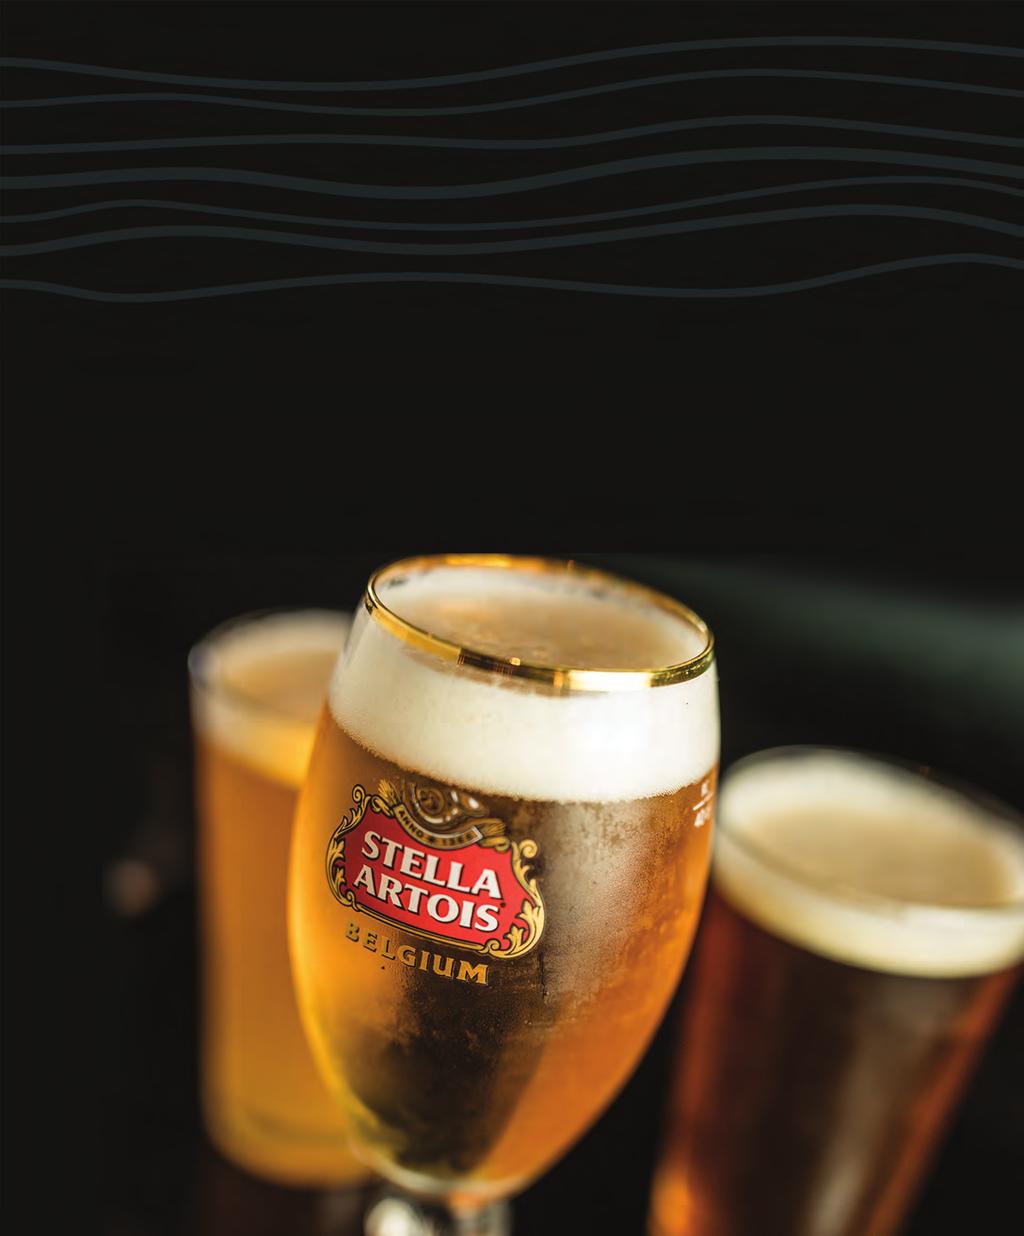 Draft Beers Stella Artois Bud Light Craft Beers Ask your server what our four (4) Rotating Craft Beer Selections are for the Week BREWS Bottled Beer Budweiser